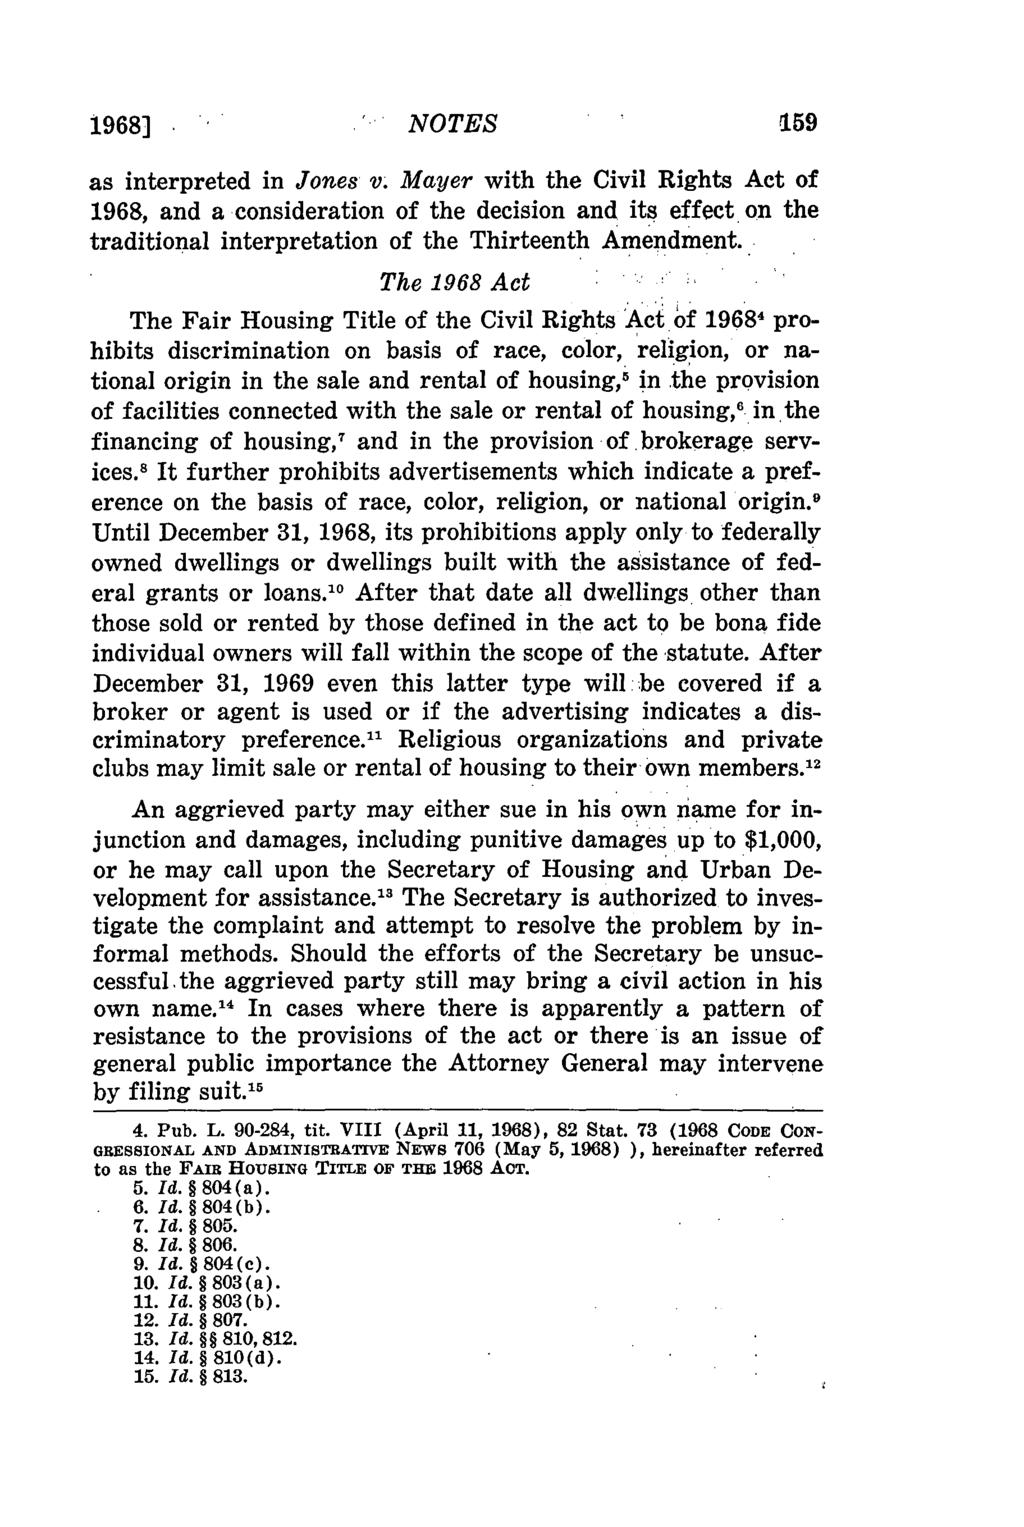 1968] NOTES as interpreted in Jones v. Mayer with the Civil Rights Act of 1968, and a consideration of the decision and its effect on the traditional interpretation of the Thirteenth Amendment.